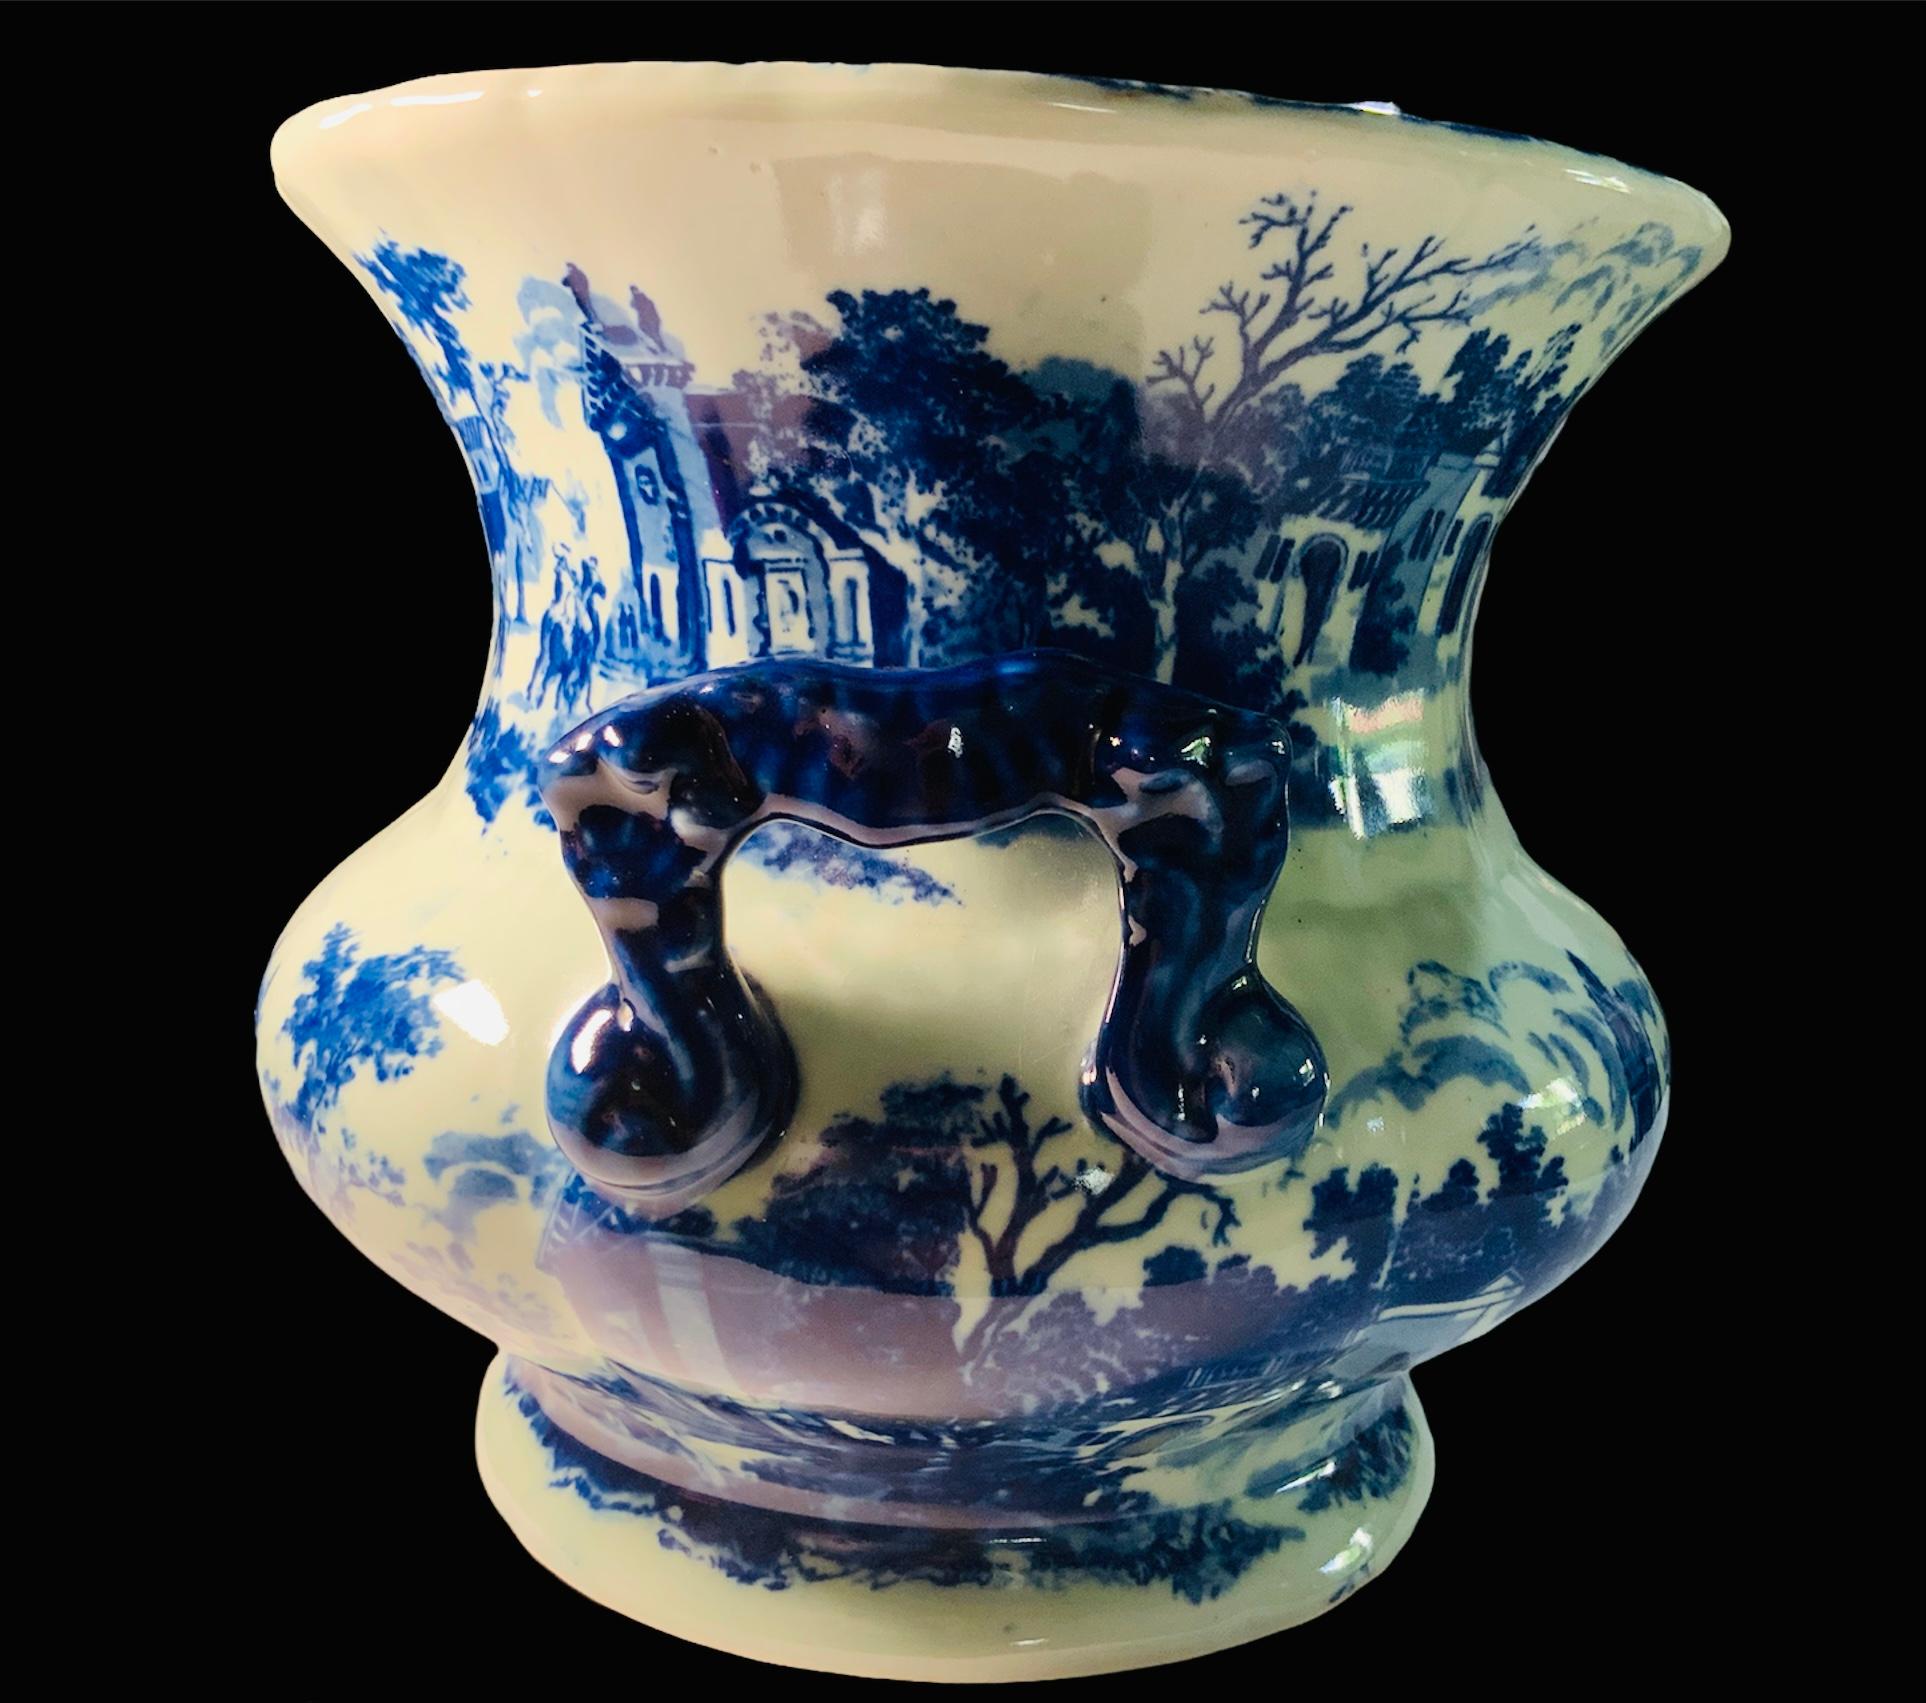 This is a Chinese reproduction of a Victoria Ware Ironstone large heavy earthenware jardiniere/planter. It is painted in white and blue with multiple flowers and foliage. It also depicts a 19th century European square scene with people walking